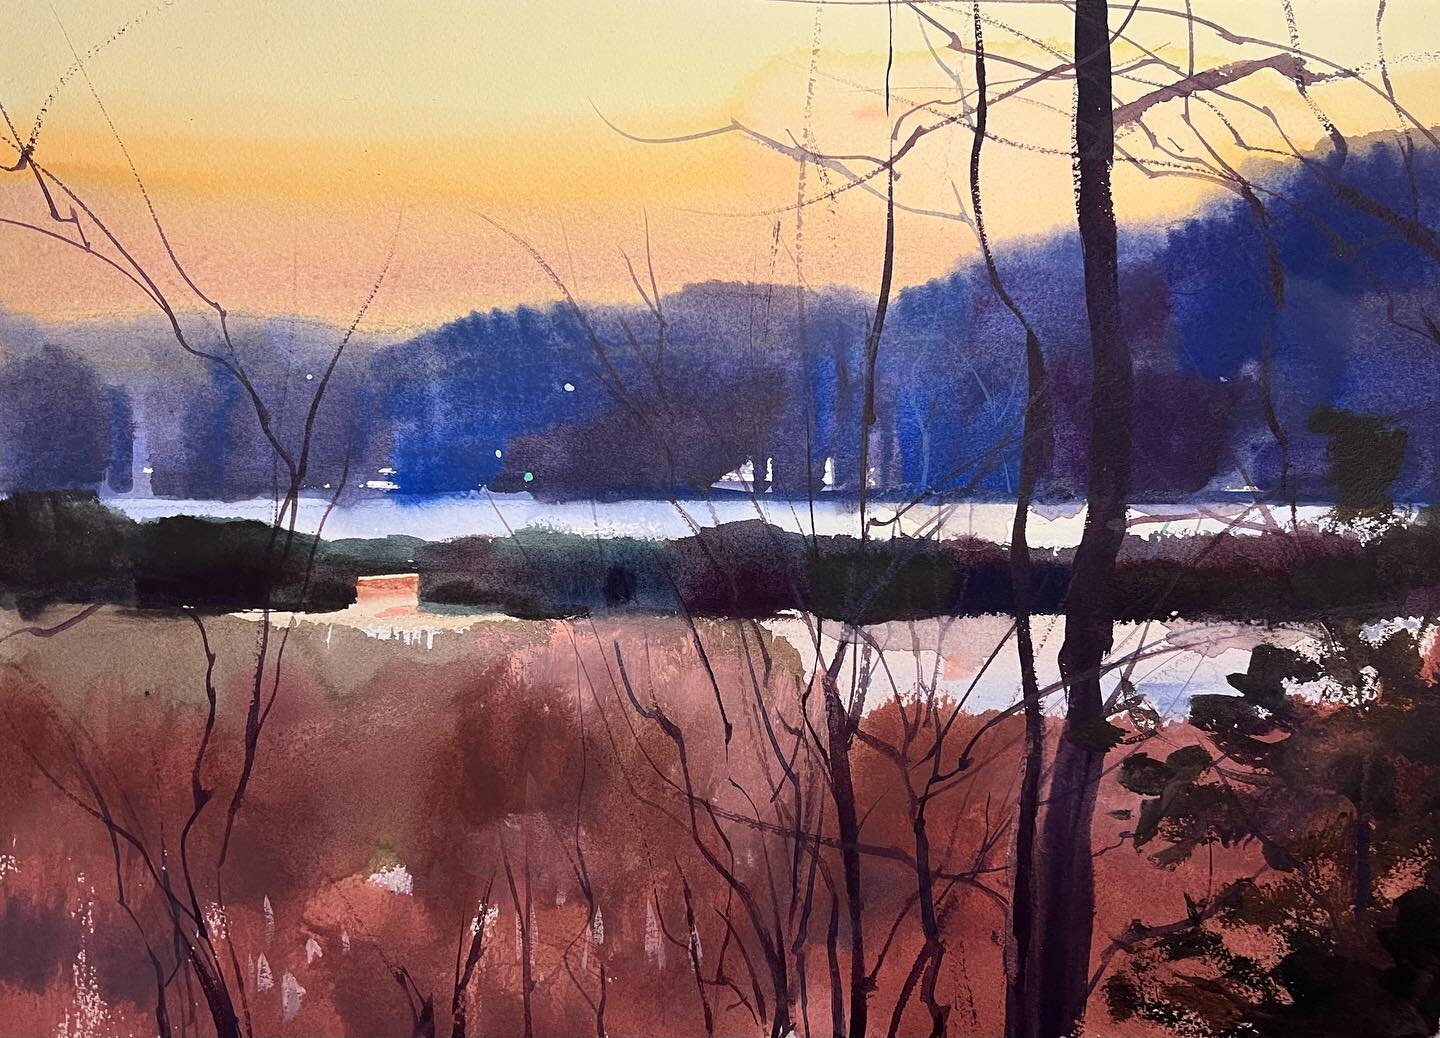 Vanderburg Cove, Rhinecliff NY. And the iconic keyhole train bridge.
Watercolor on Arches 140#
10.5 x 13.5